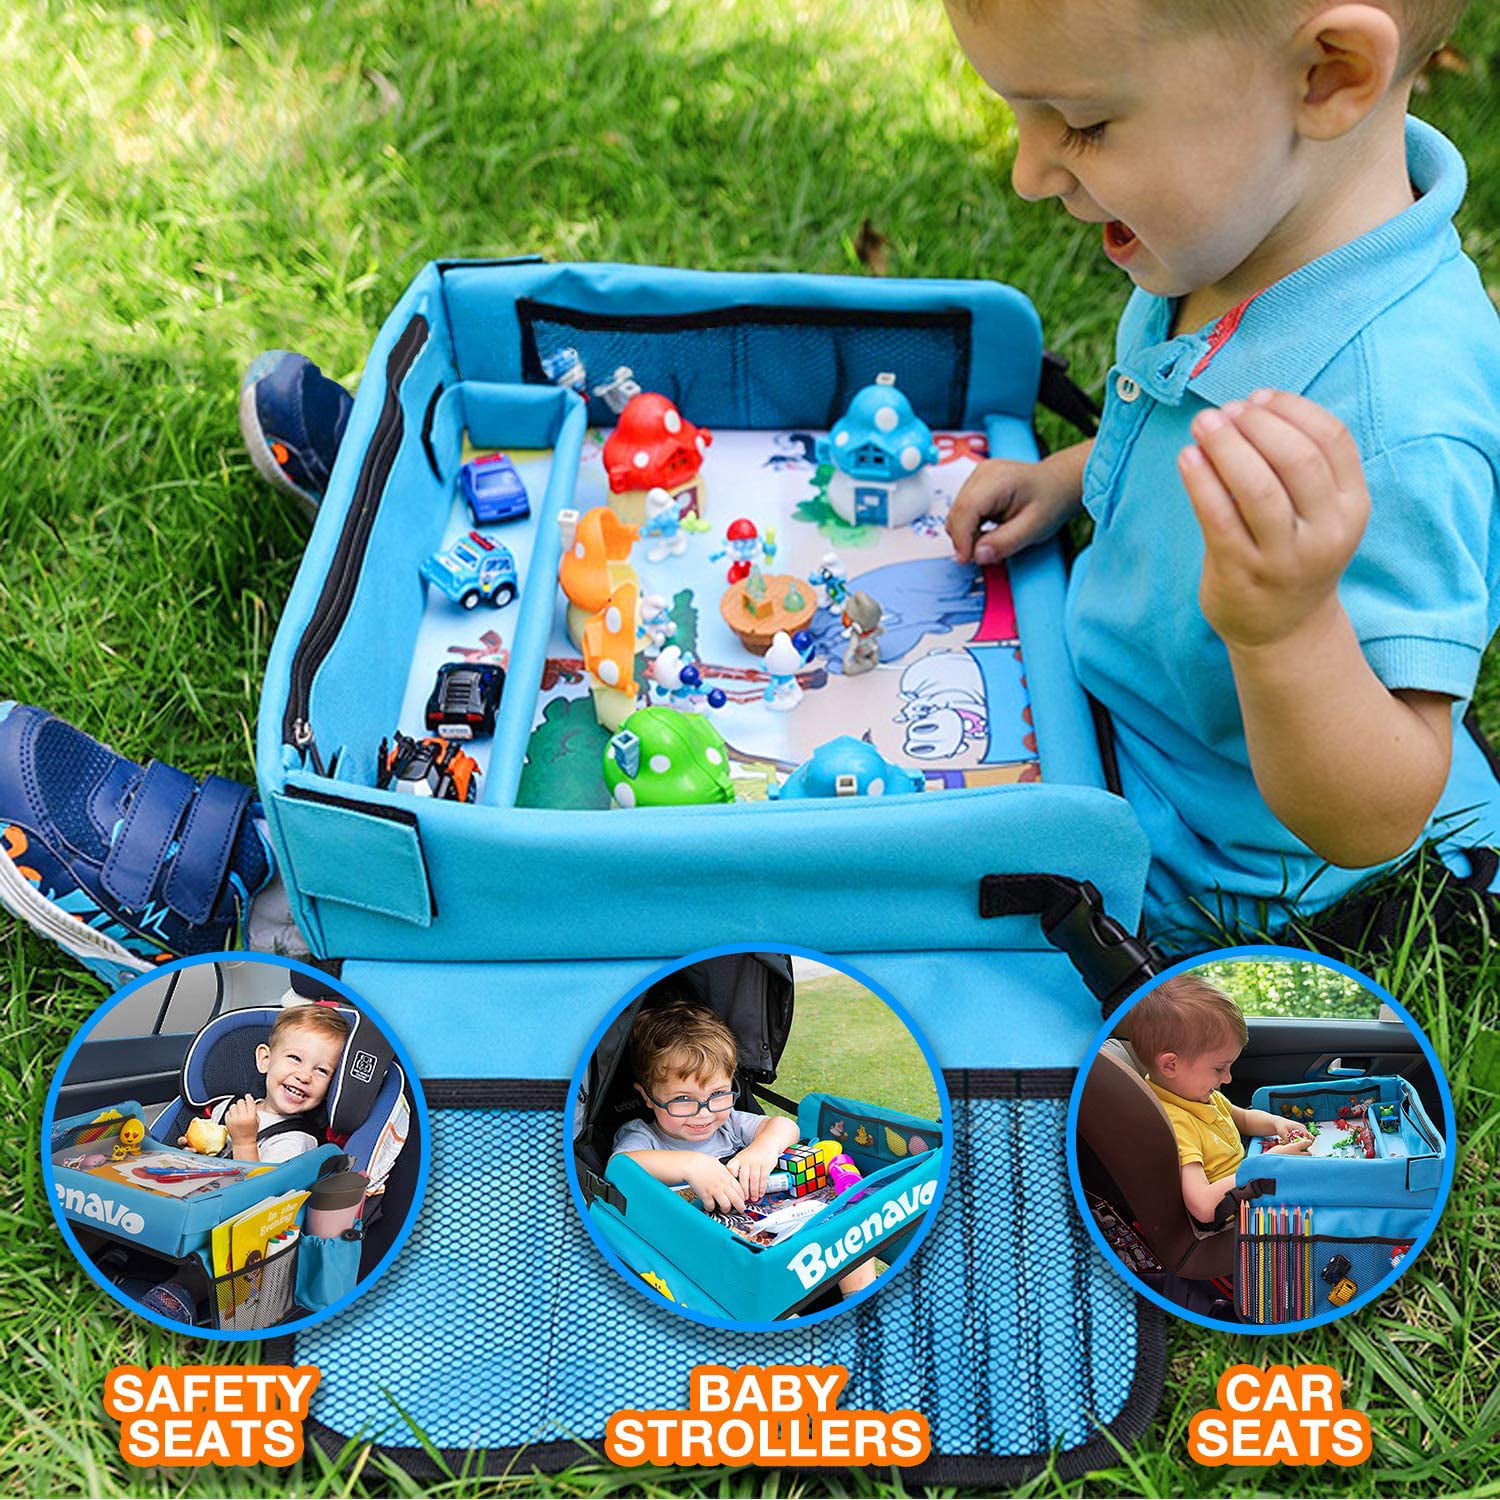 Fun Lap Desk for Kids with Tablet Blue Phone & Cup Holder Car Seat Activity Snack and Play Tray for Children or Toddlers Idefair Kids Travel Tray 